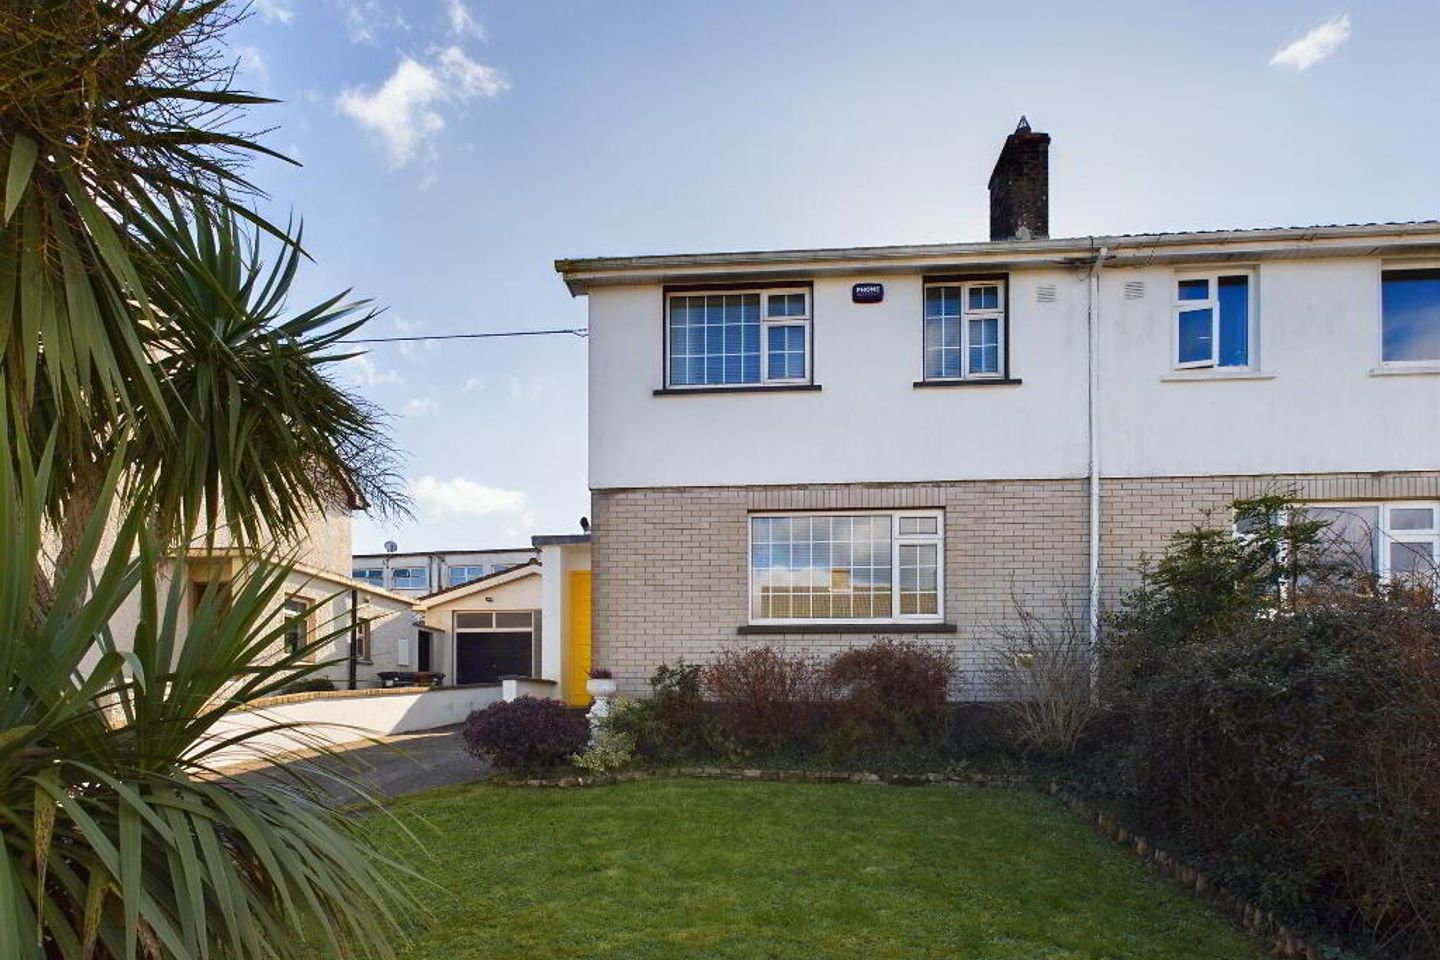 24 Glenville, Dunmore Road, Waterford City, Co. Waterford, X91WPP5